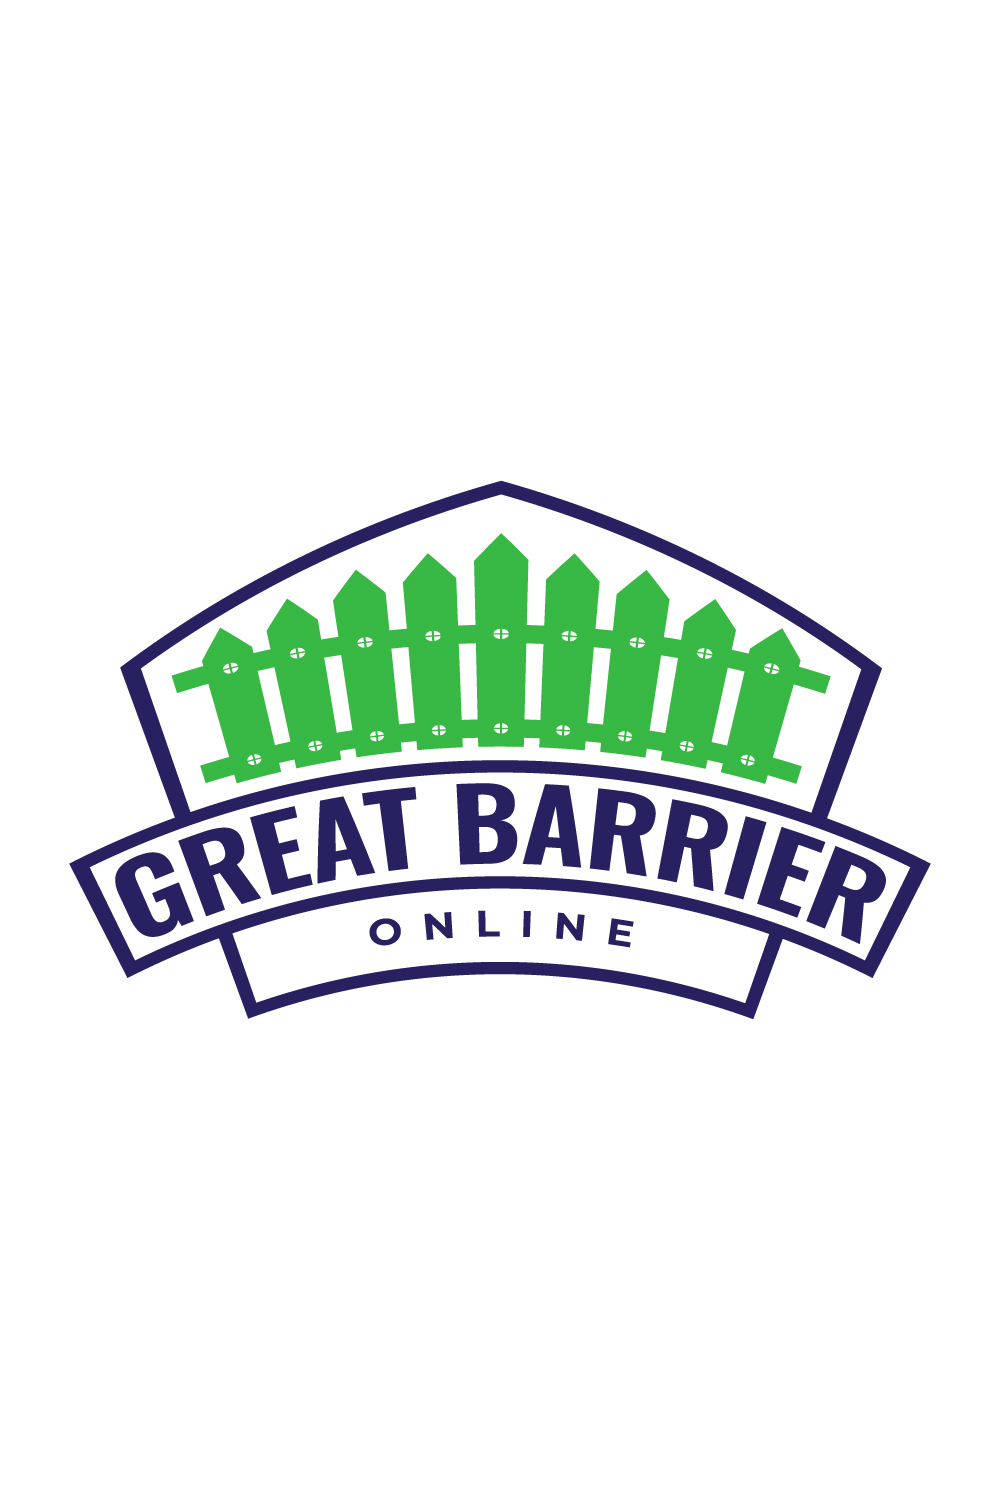 Great Barrier Logo design for your brand pinterest preview image.